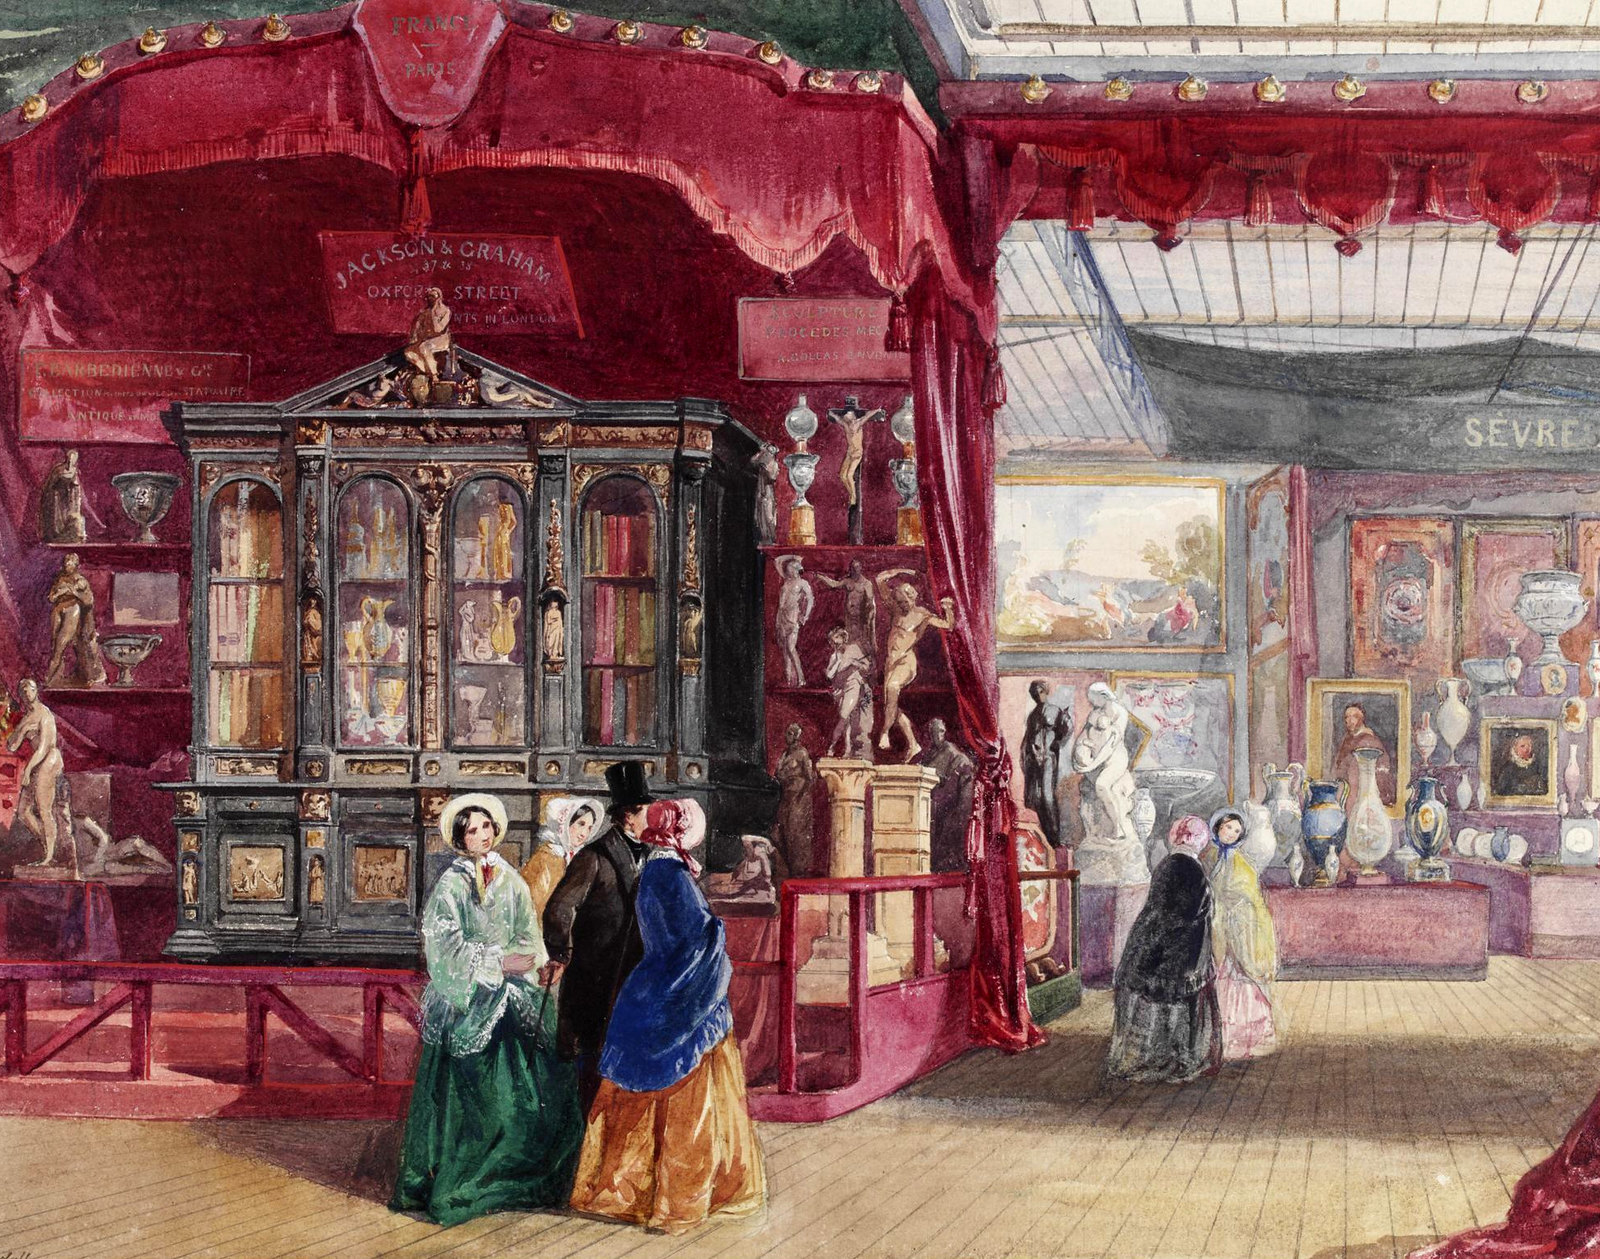 'Part of the French Court, No. 1 (Sèvres)', with a display of porcelain by the Sèvres factory visible in the background. © Victoria and Albert Museum, London